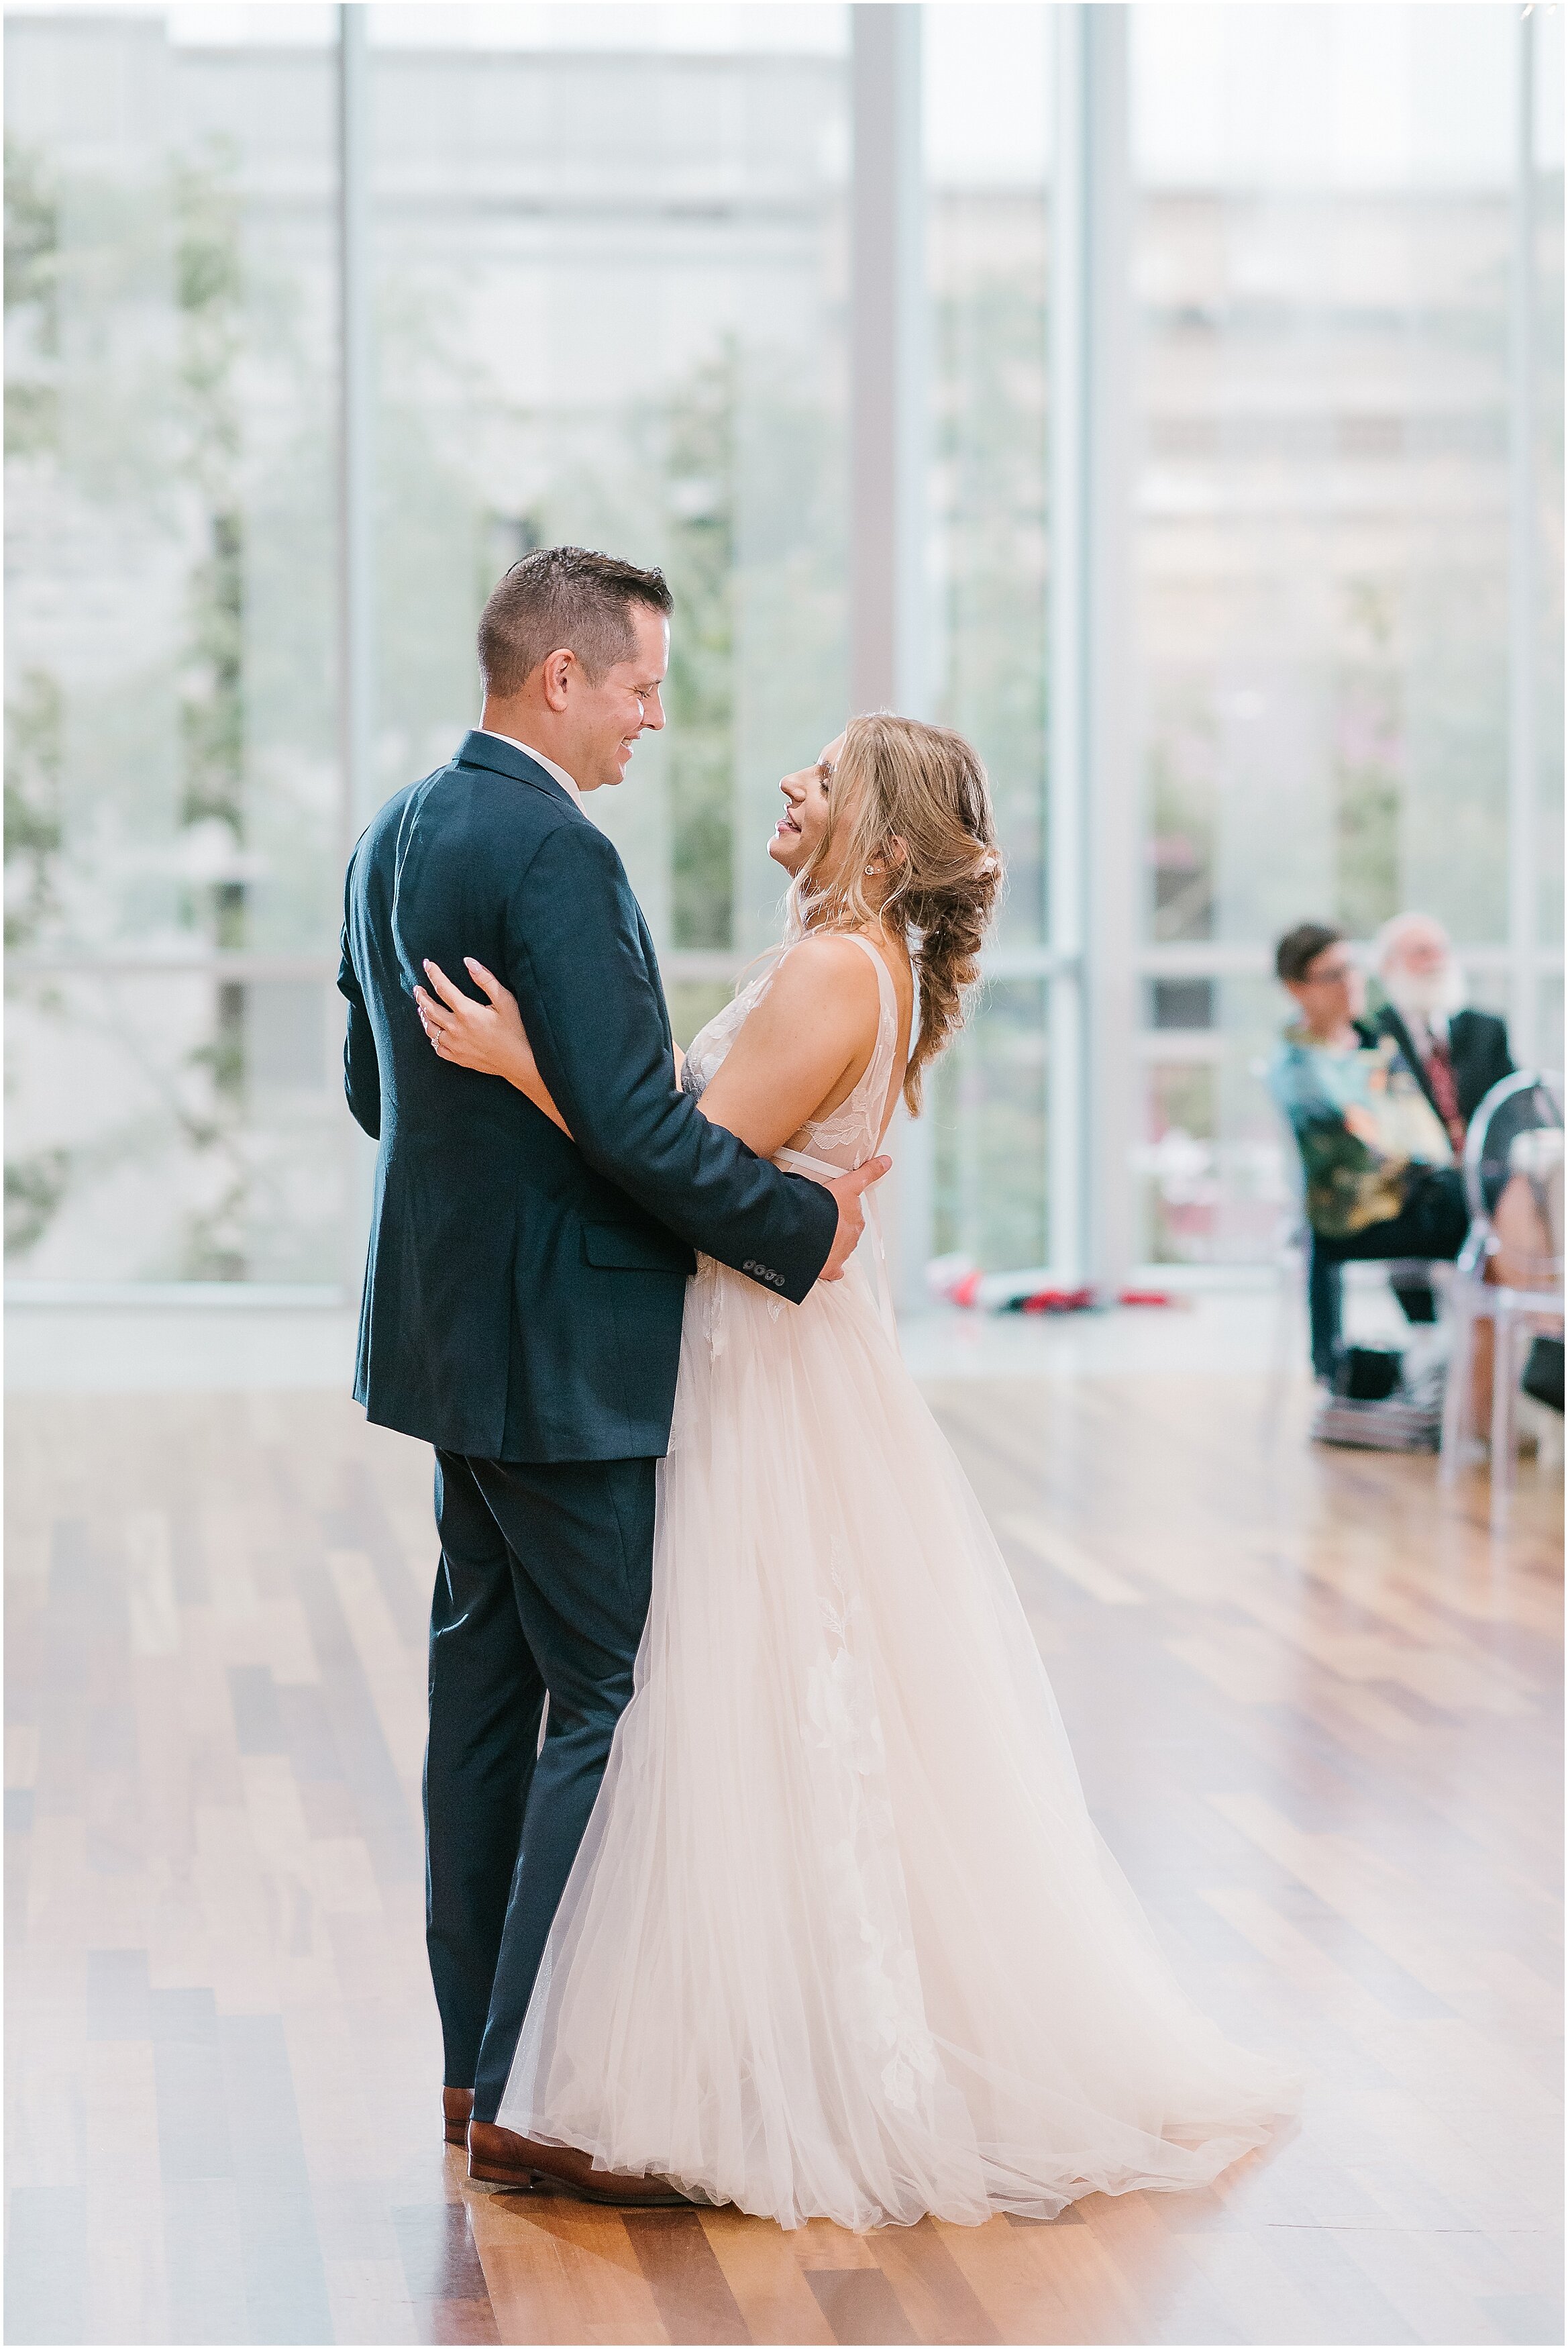 Rebecca Shehorn Photography Colleen and Kyle Inn at Irwin Gardens Wedding-919_The Commons Columbus Inn at Irwin Garden Indianapolis Wedding Photographer.jpg